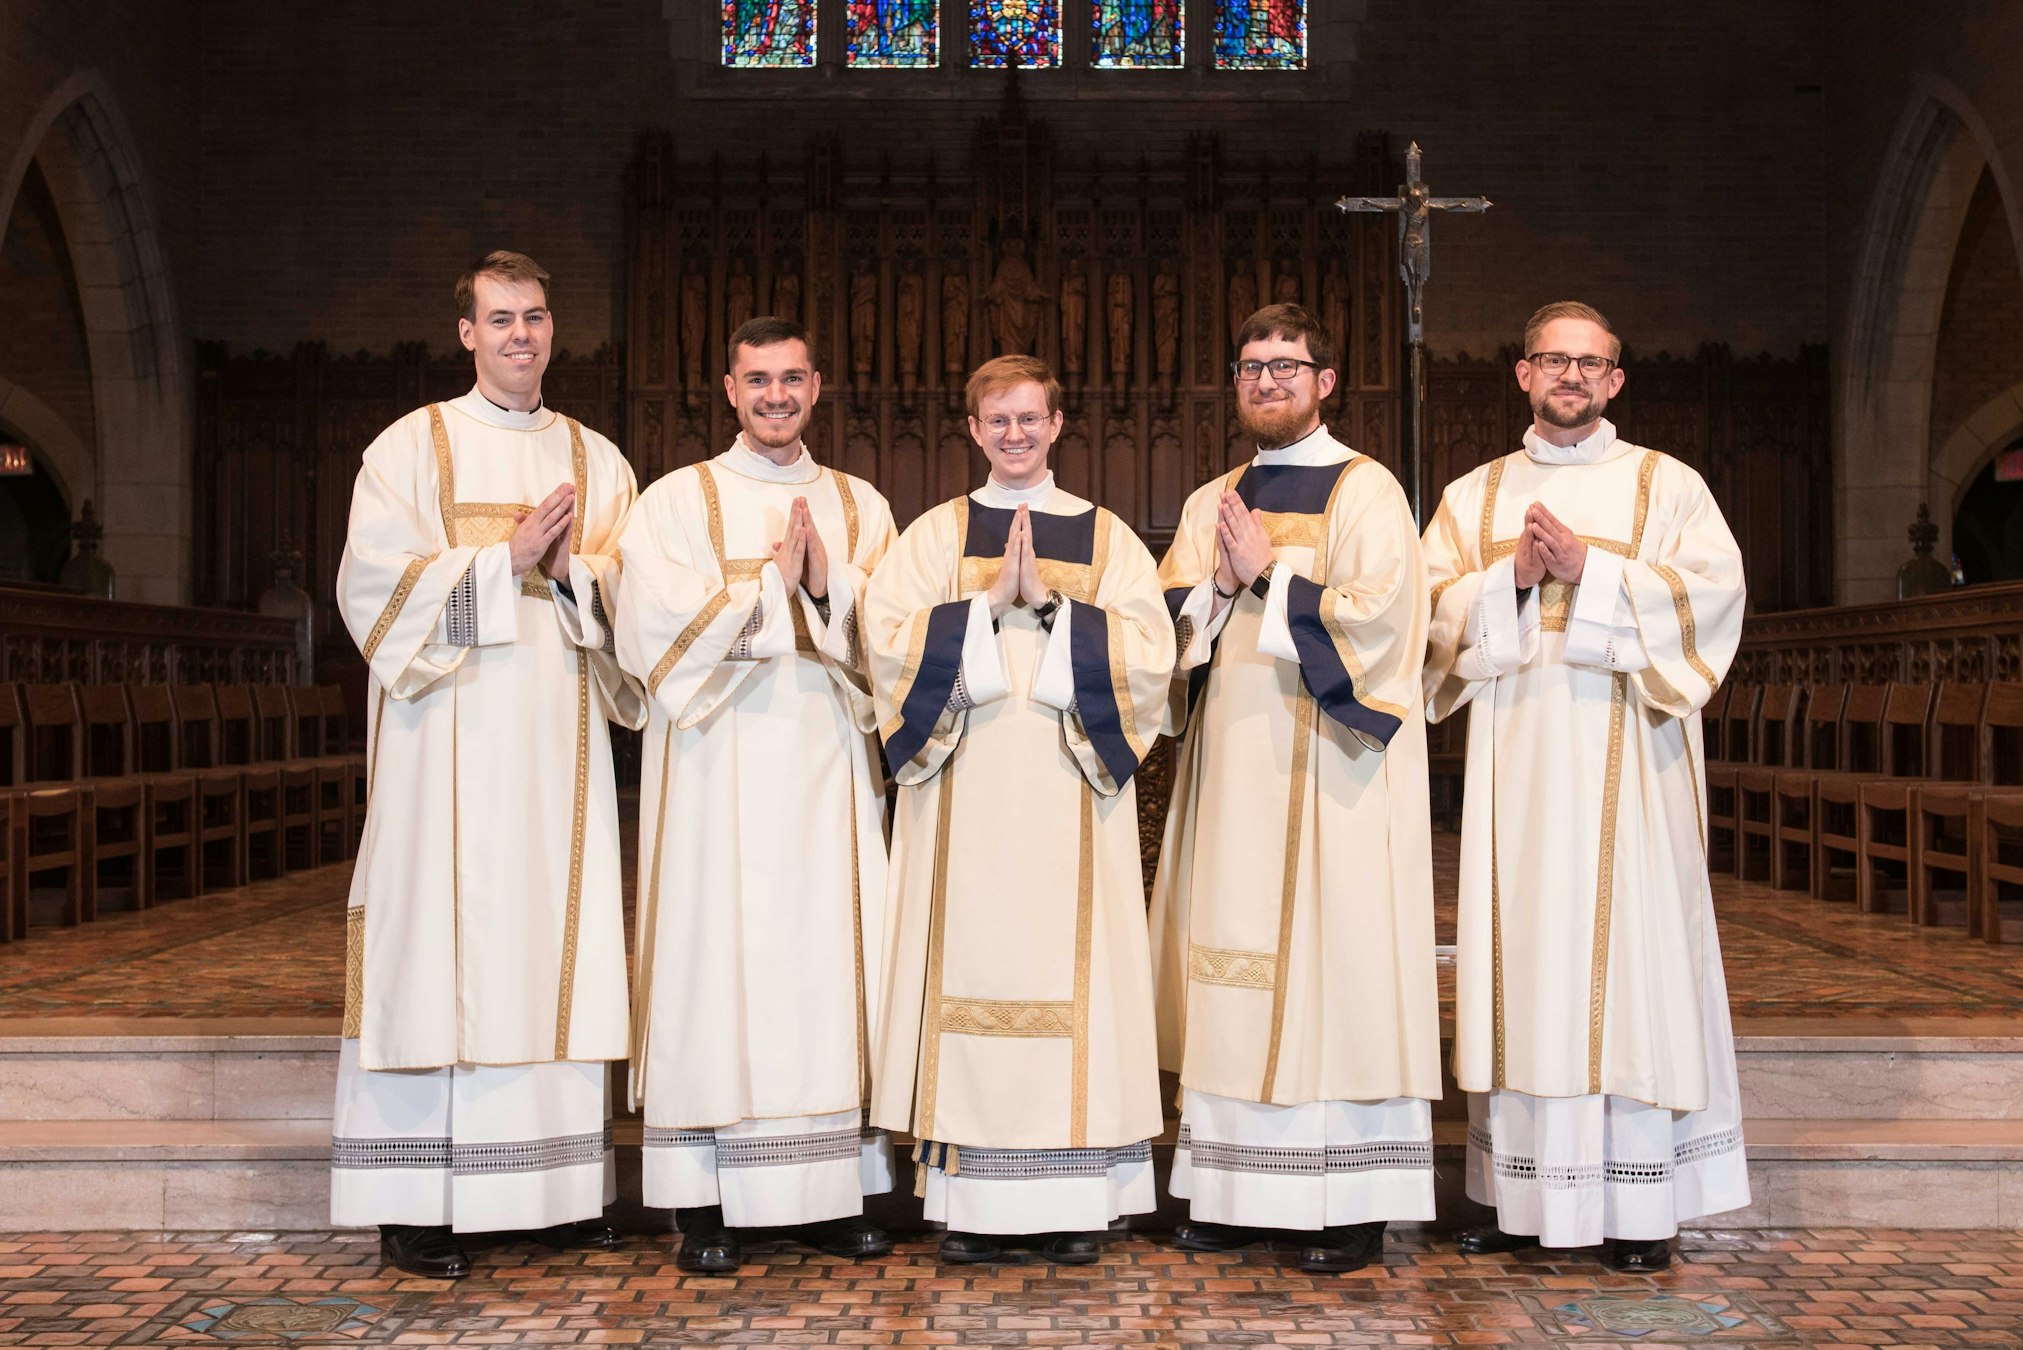 Meet the five men who will be ordained priests for the Archdiocese of